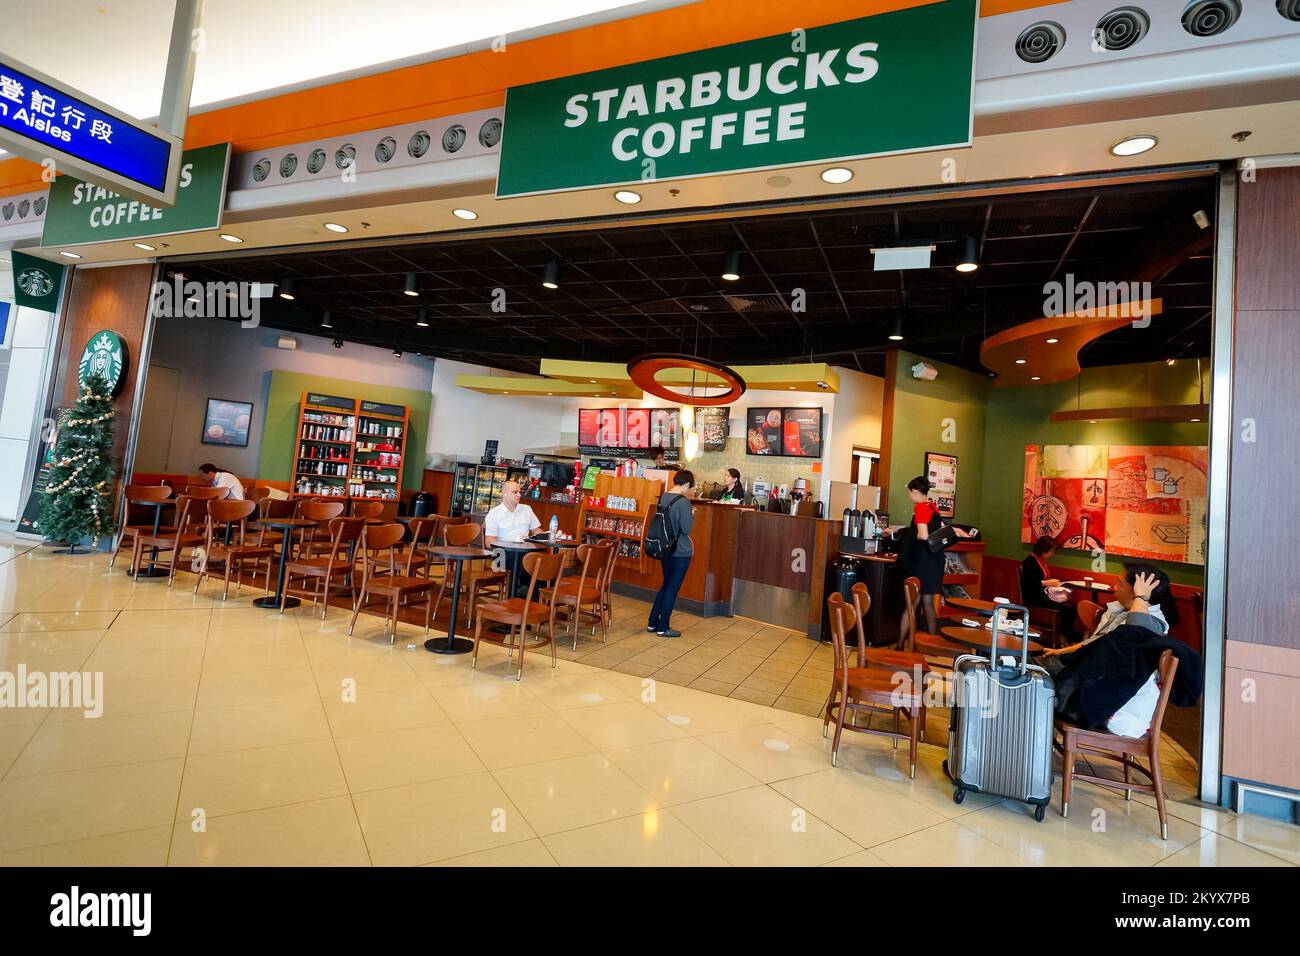 HONG KONG - DECEMBER 24, 2015: interior of Starbucks cafe. Starbucks Corporation is an American global coffee company and coffeehouse chain based in S Stock Photo